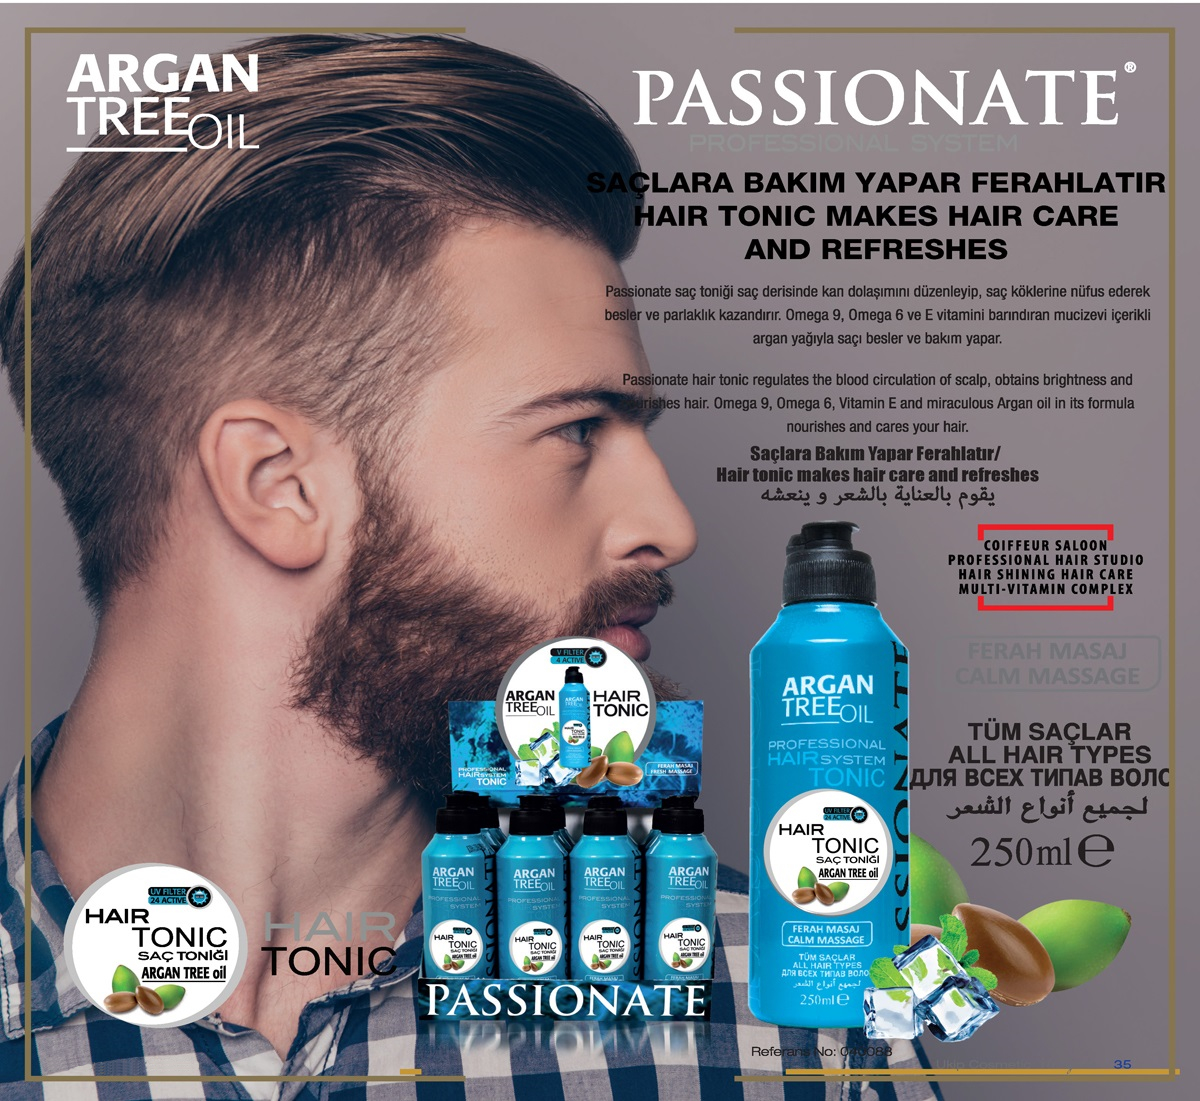 Hair Styling Powder Passionate